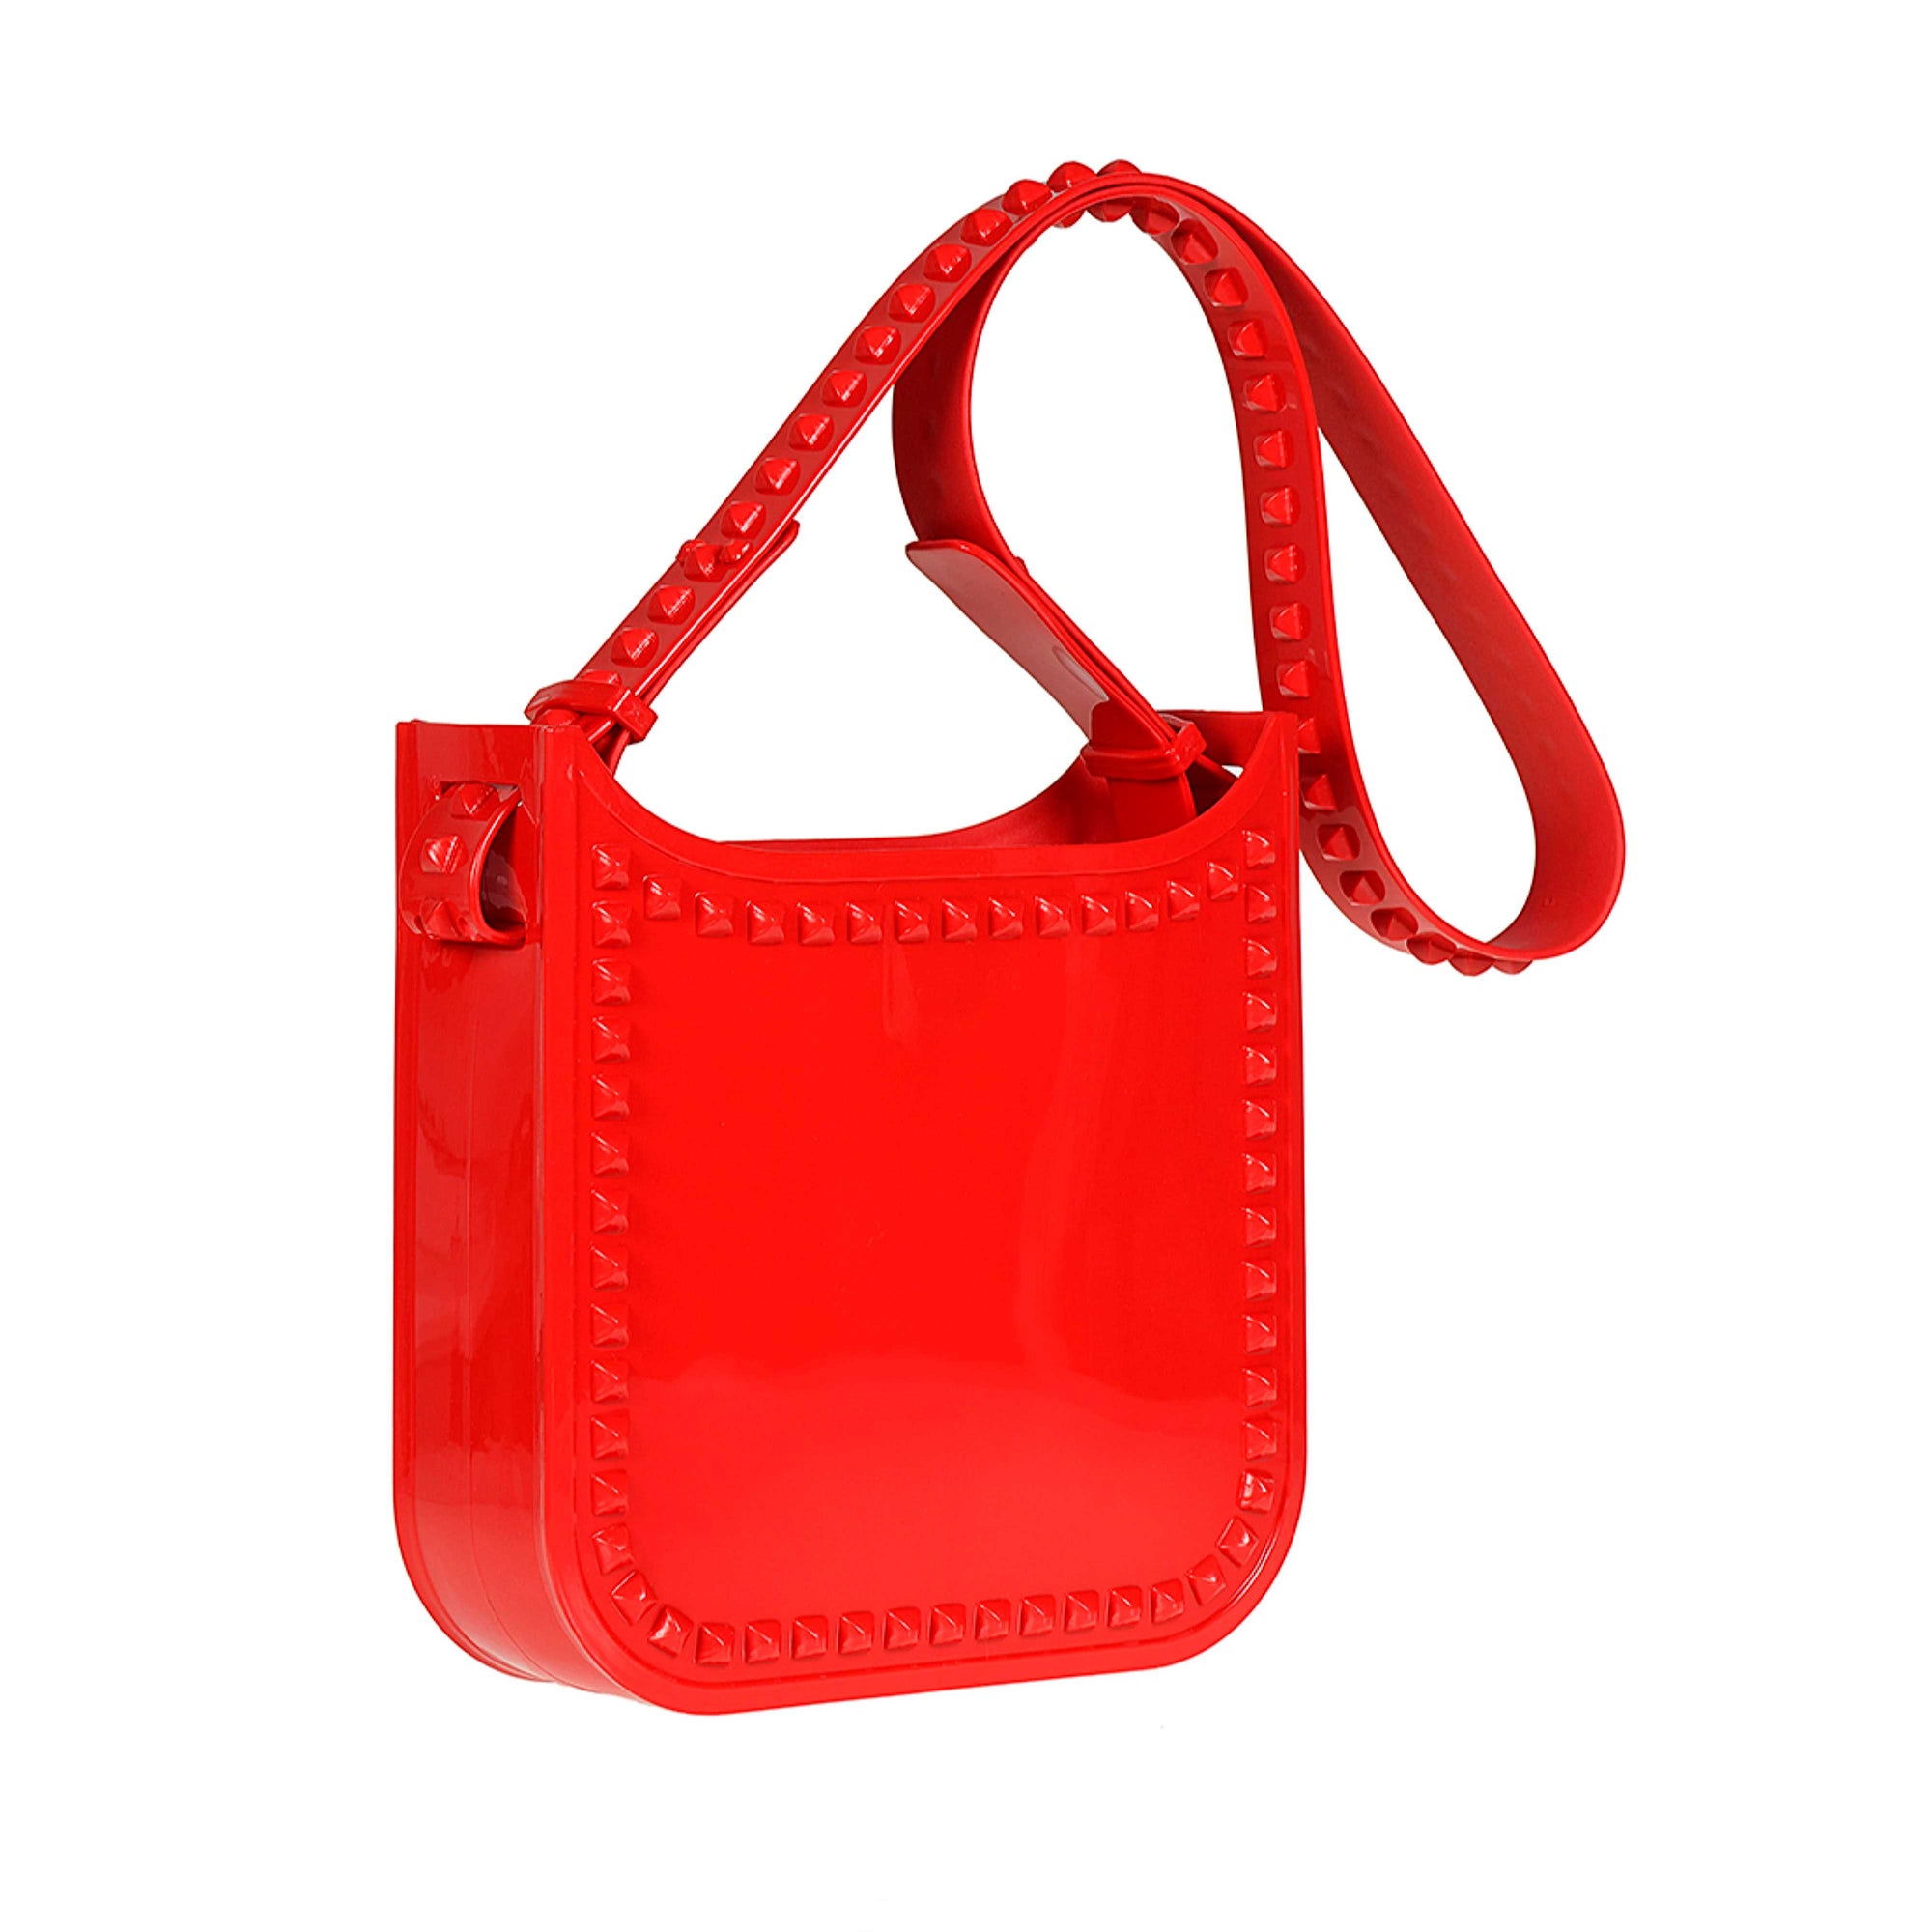 Studded Carmen Sol jelly crossbody bags in color red